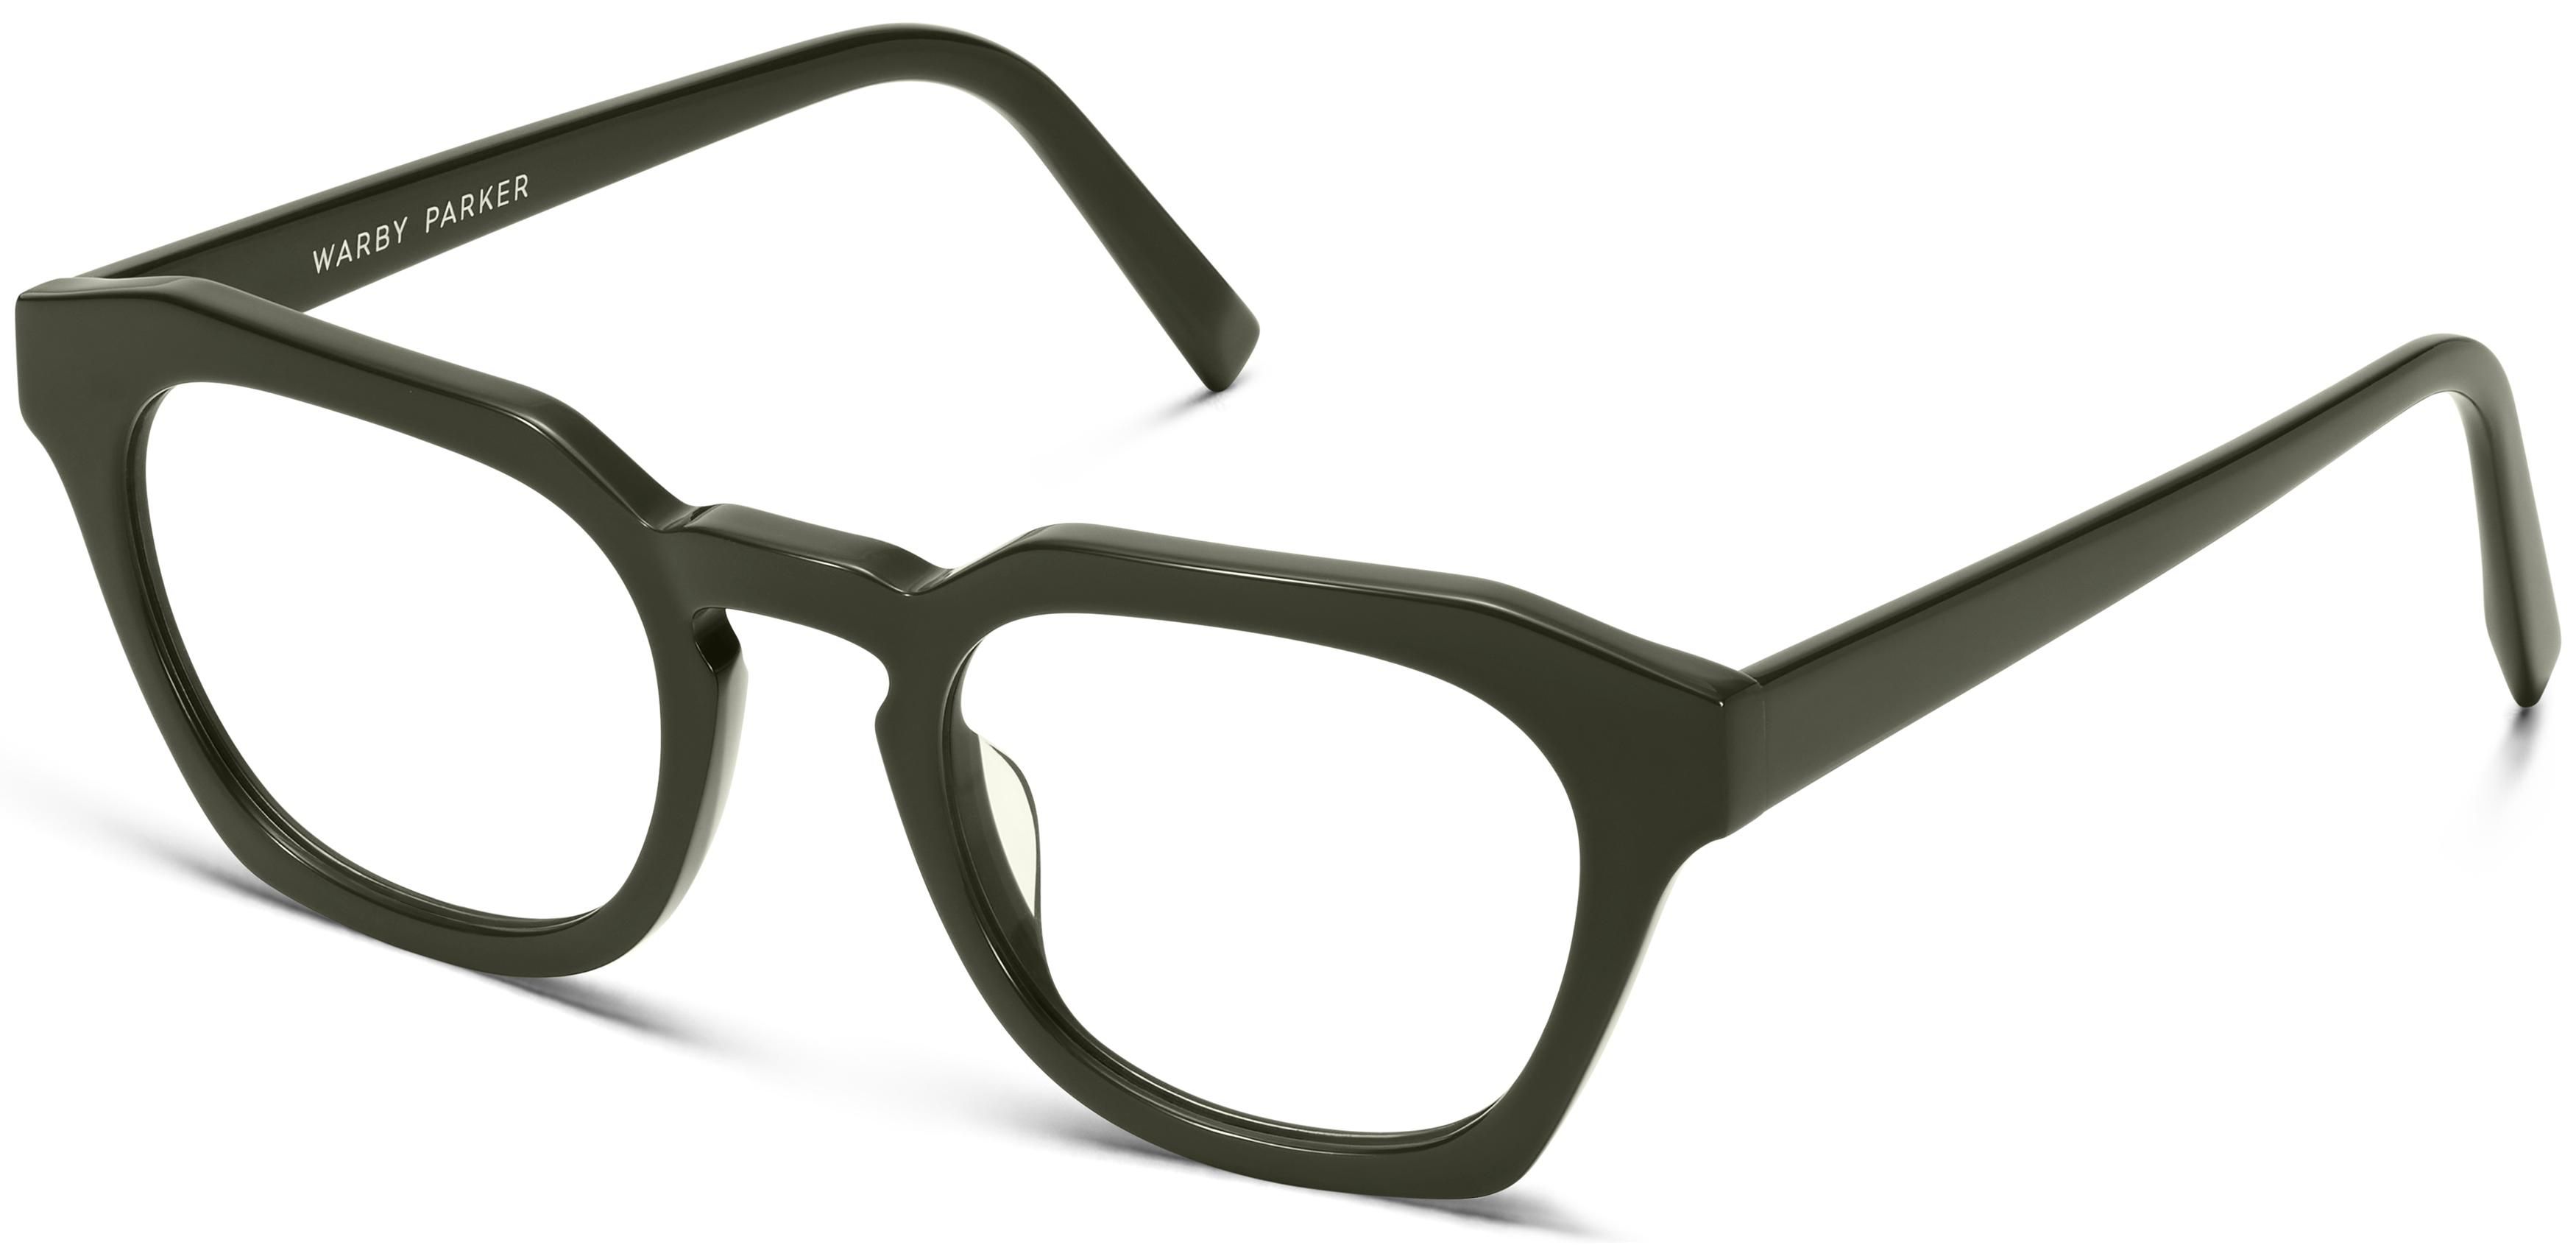 Rufus Eyeglasses in Smoky Green | Warby Parker | Warby Parker (US)